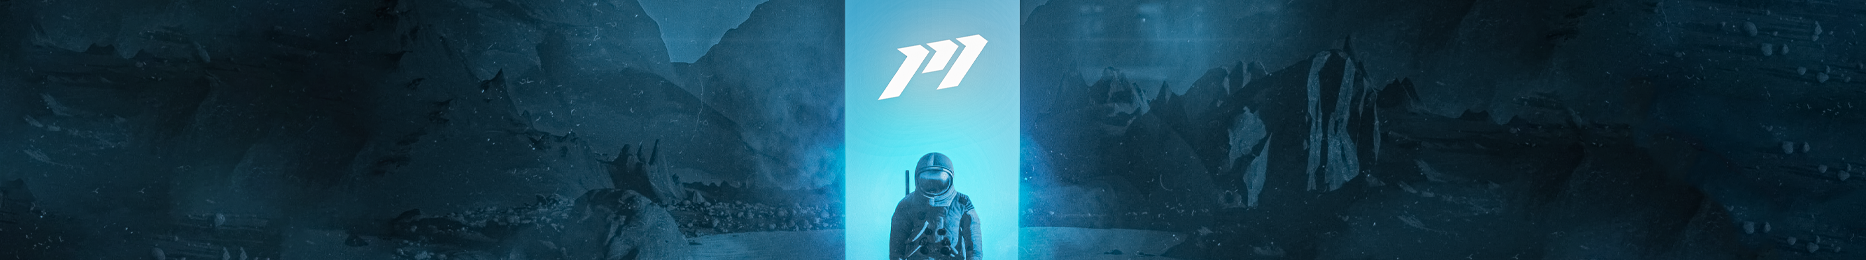 Mohammad | M7's profile banner